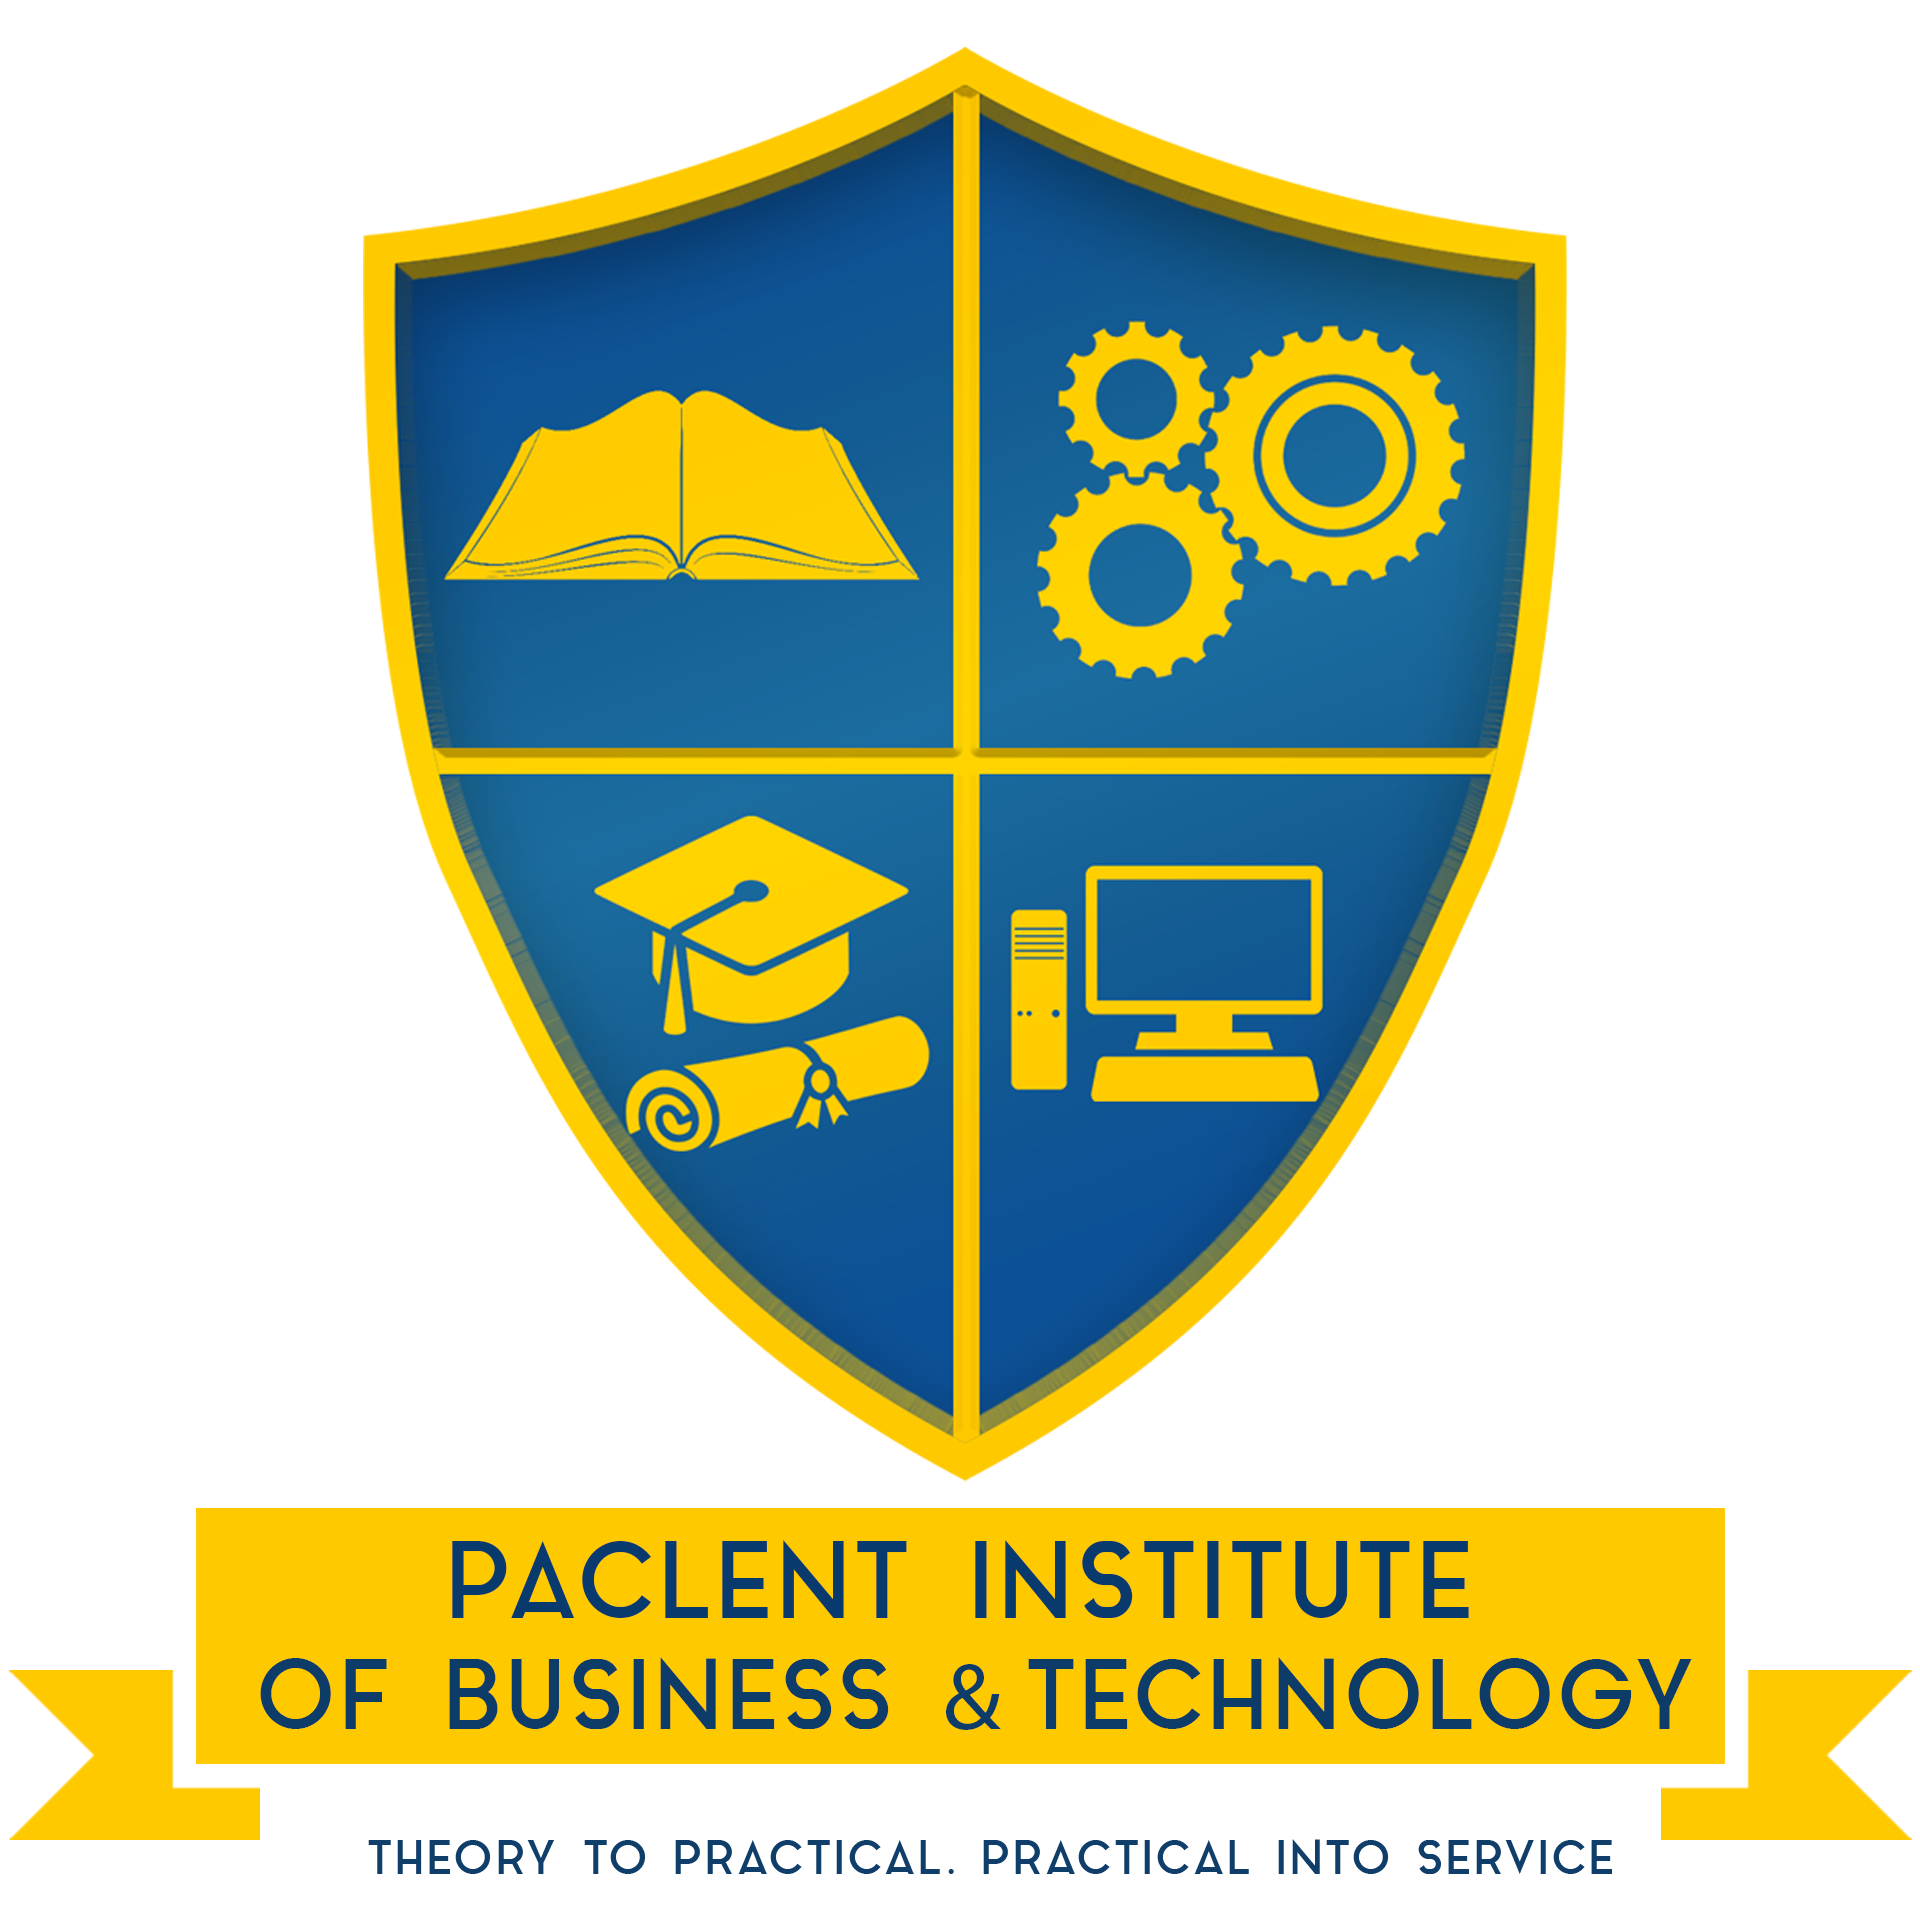 PACLENT INSTITUTE OF BUSINESS AND TECHNOLOGY